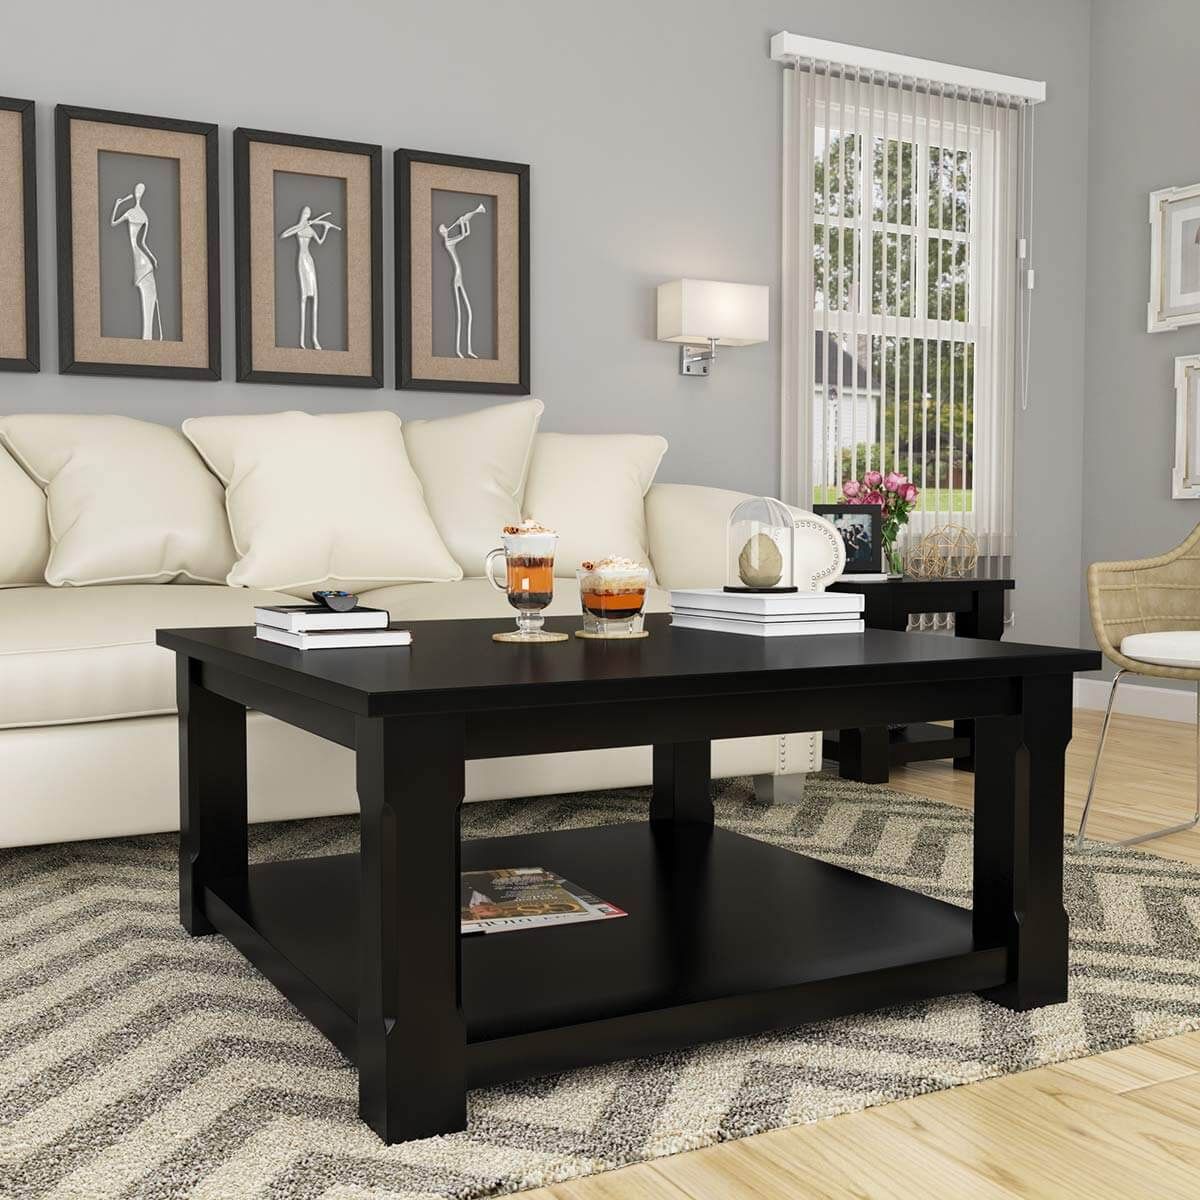 Black Wood Square Coffee Table – Brimson Contemporary Style Solid Wood With Regard To Wood Coffee Tables With 2 Tier Storage (Gallery 6 of 20)